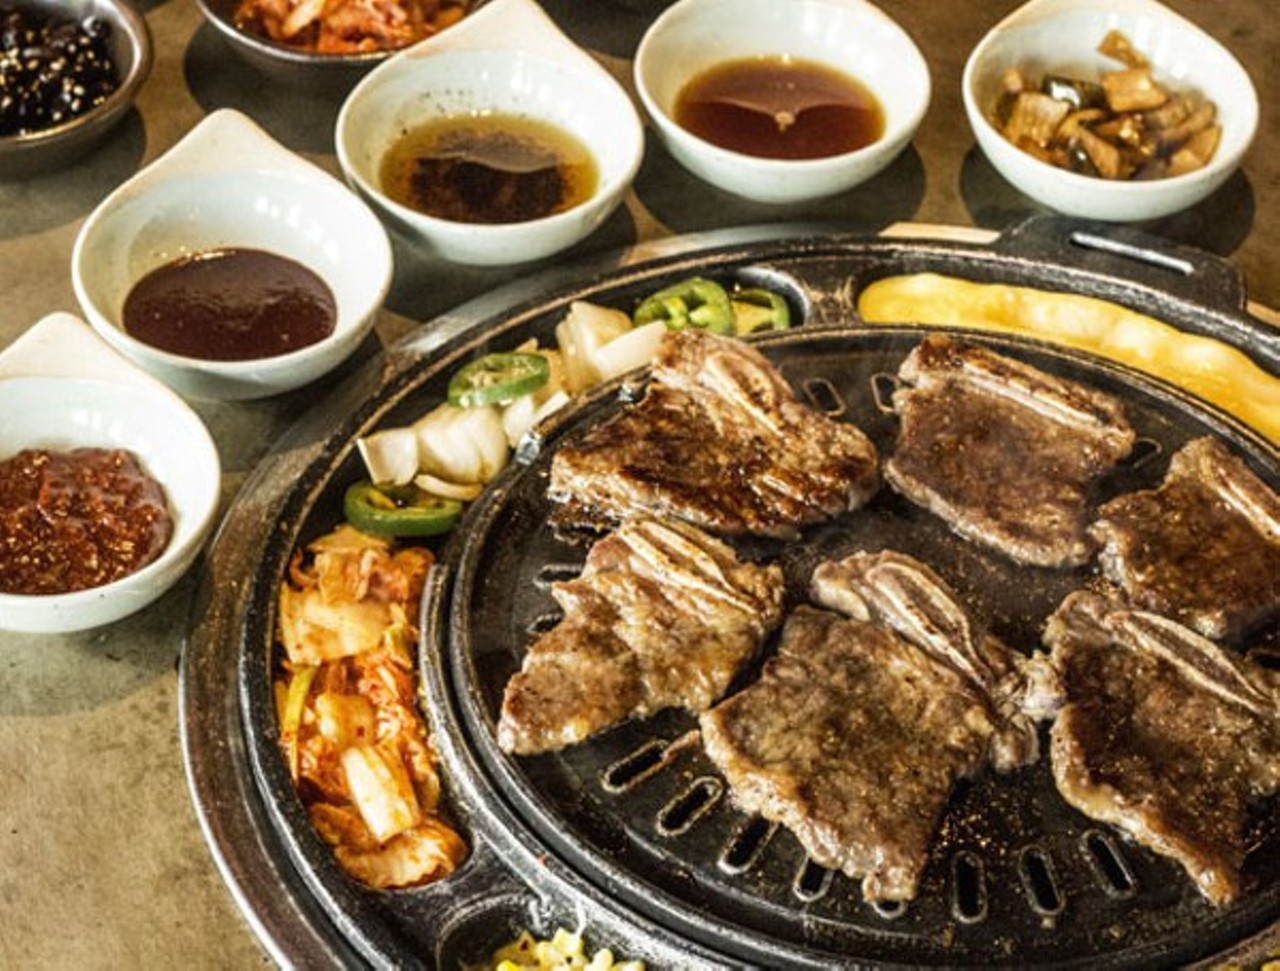 The restaurant offers appetizers and hot pots, but there's no question that the reason to go here is to sample the table-top style cooking -- especially those "LA style" short ribs which are the restaurant's version of the glorious galbi.Photo by Mabel Suen.